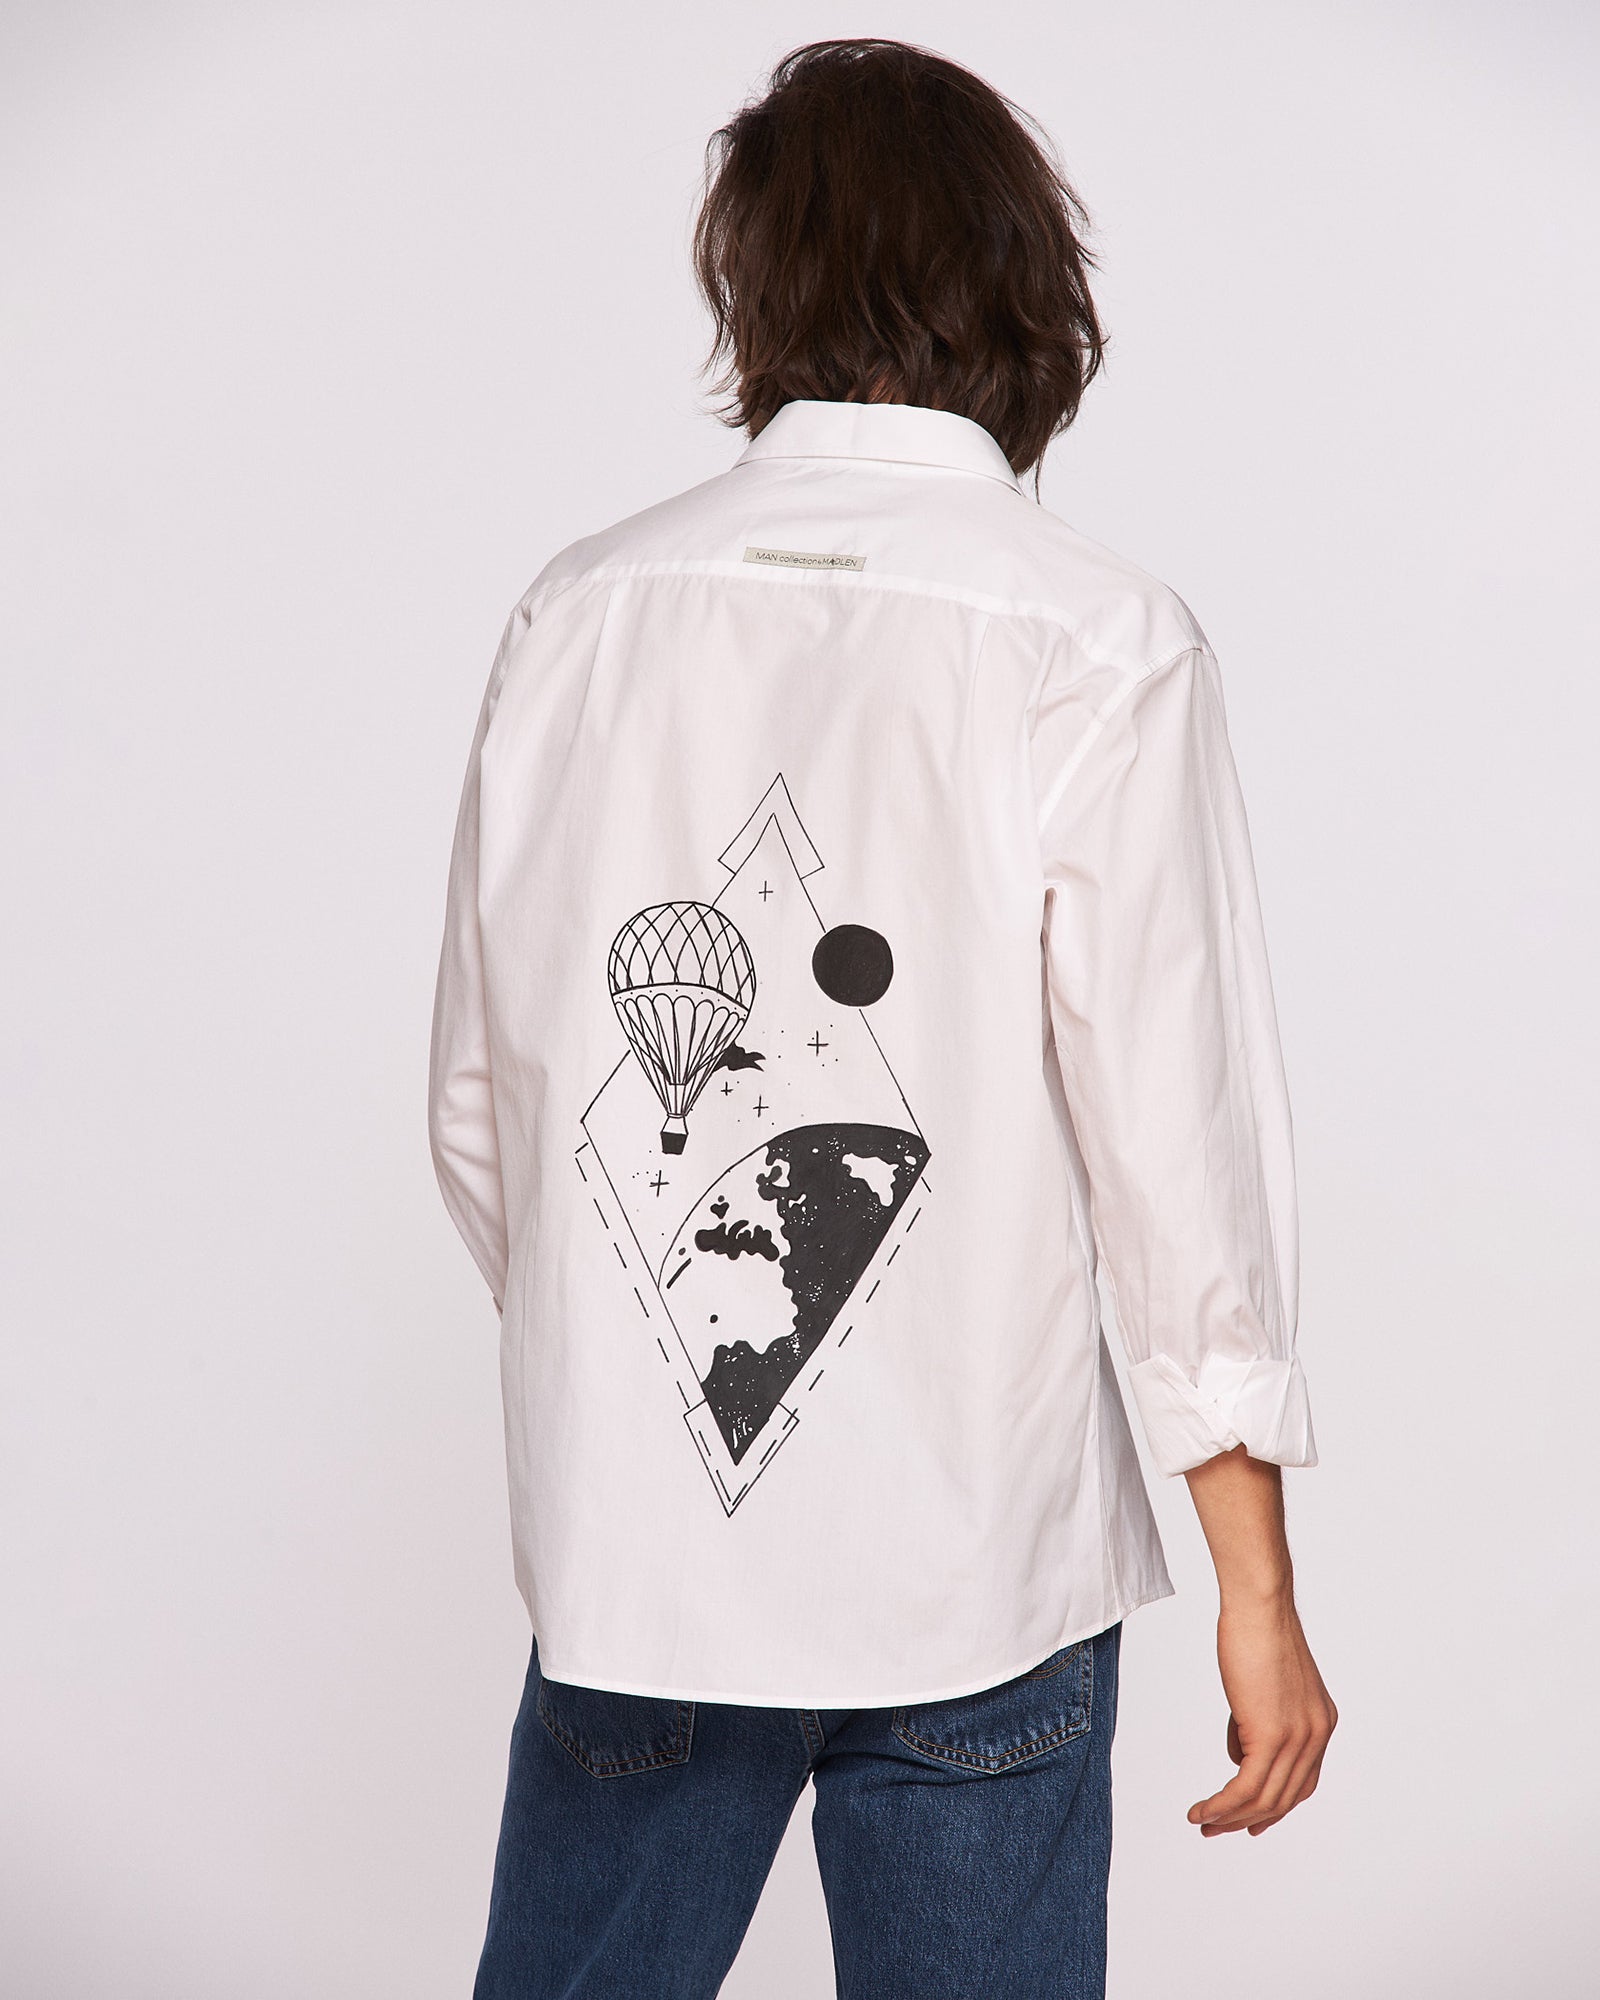 Men's hand-painted shirt "Above the world"